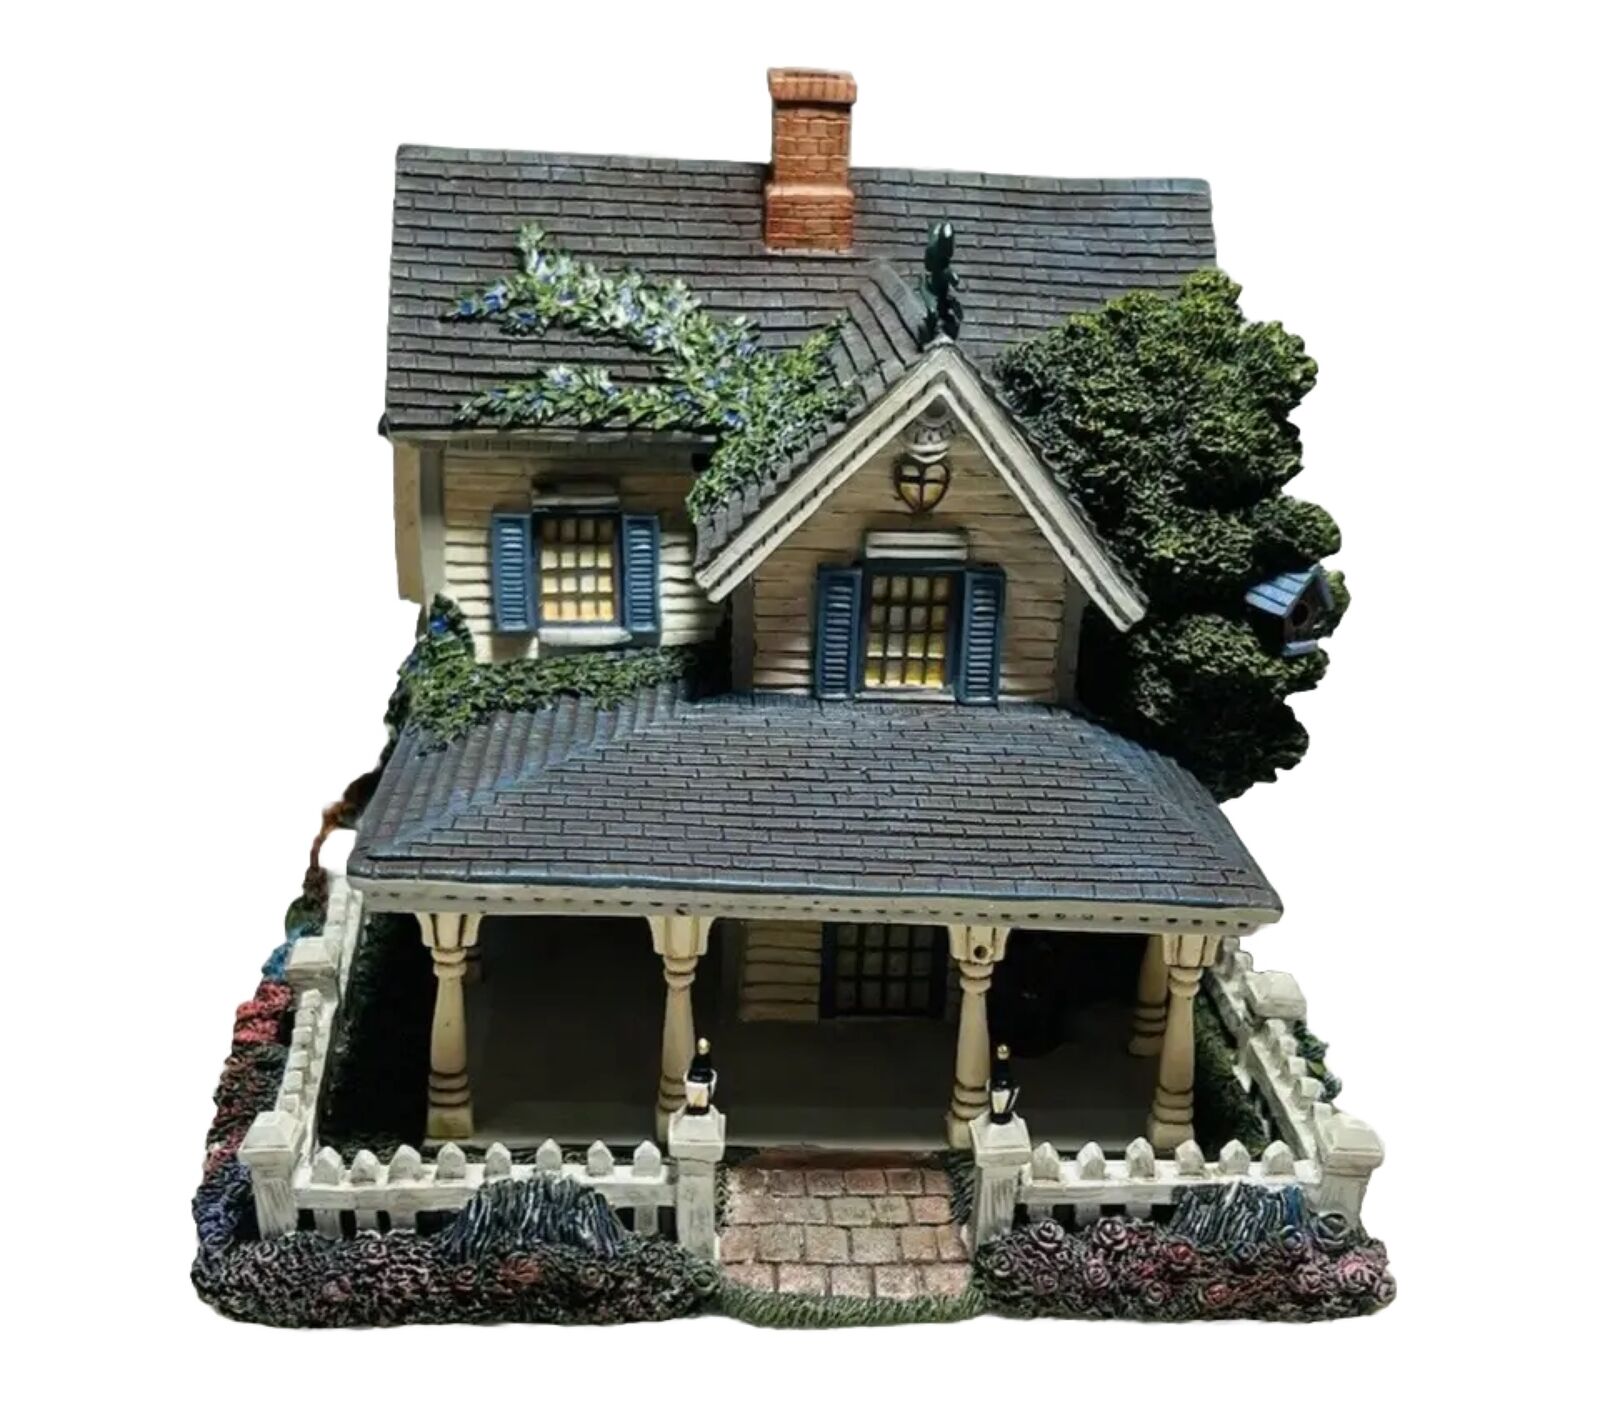 Thomas Kinkade Home is Where Heart is Home Spring Collection Hawthorne Village